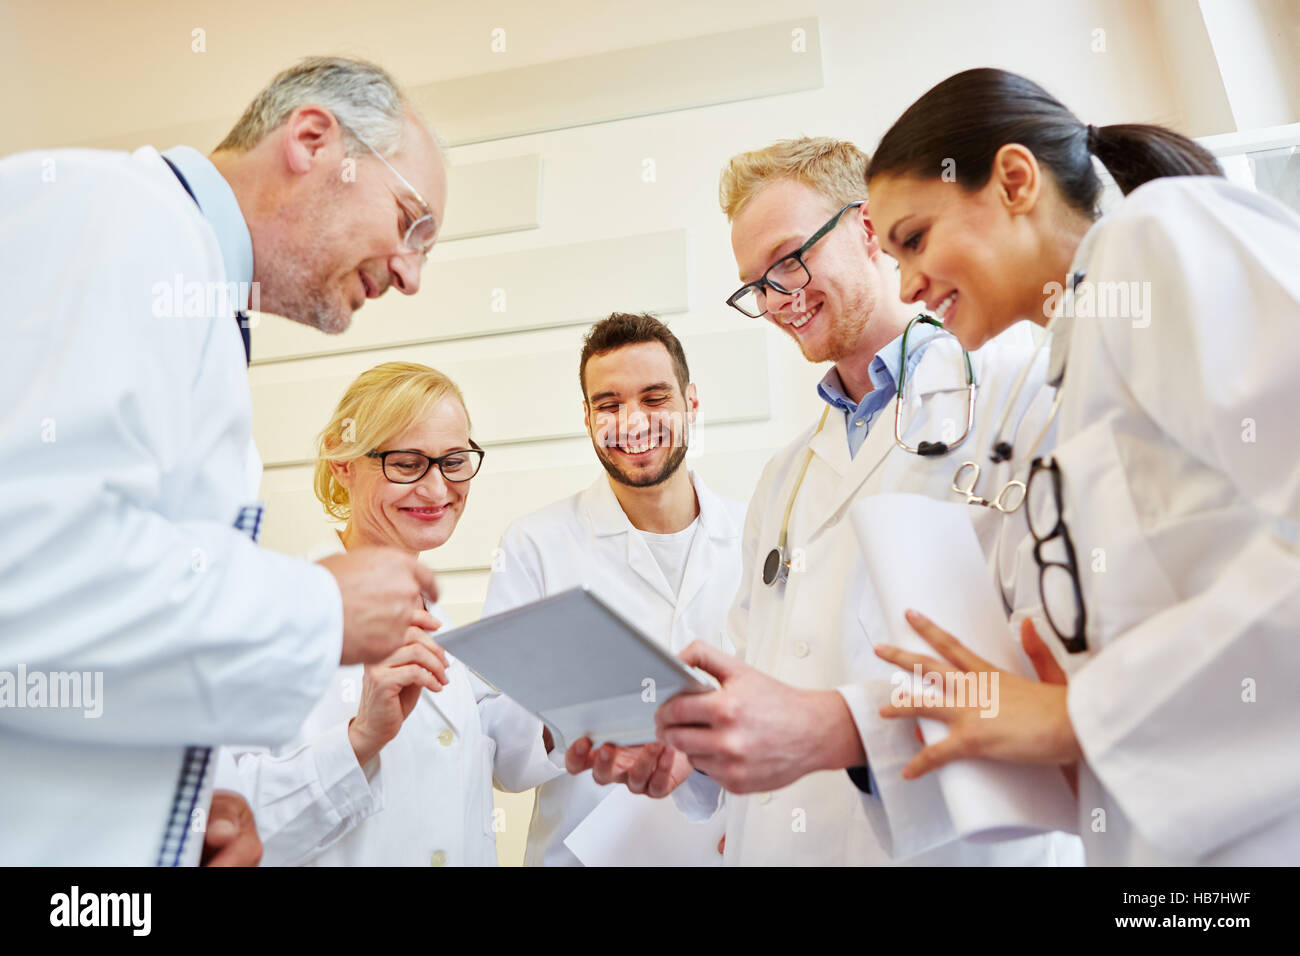 Team of doctors with tablet cooperating with joy Stock Photo